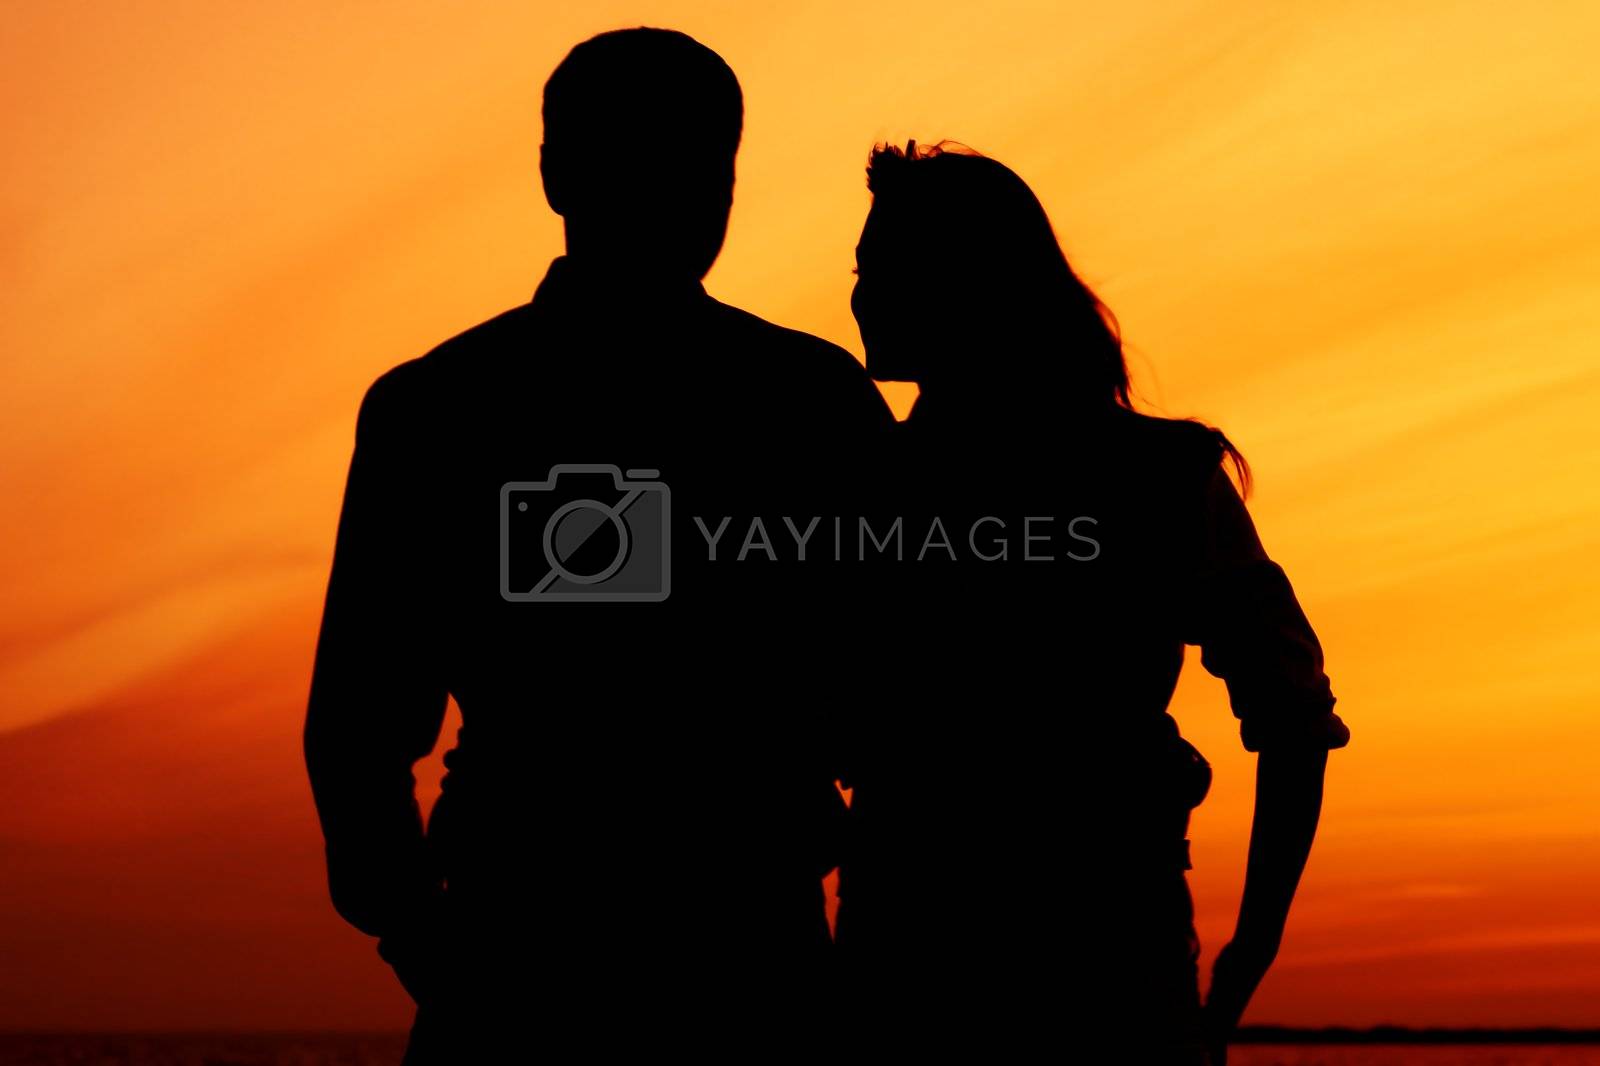 Royalty free image of sunset love by Yellowj